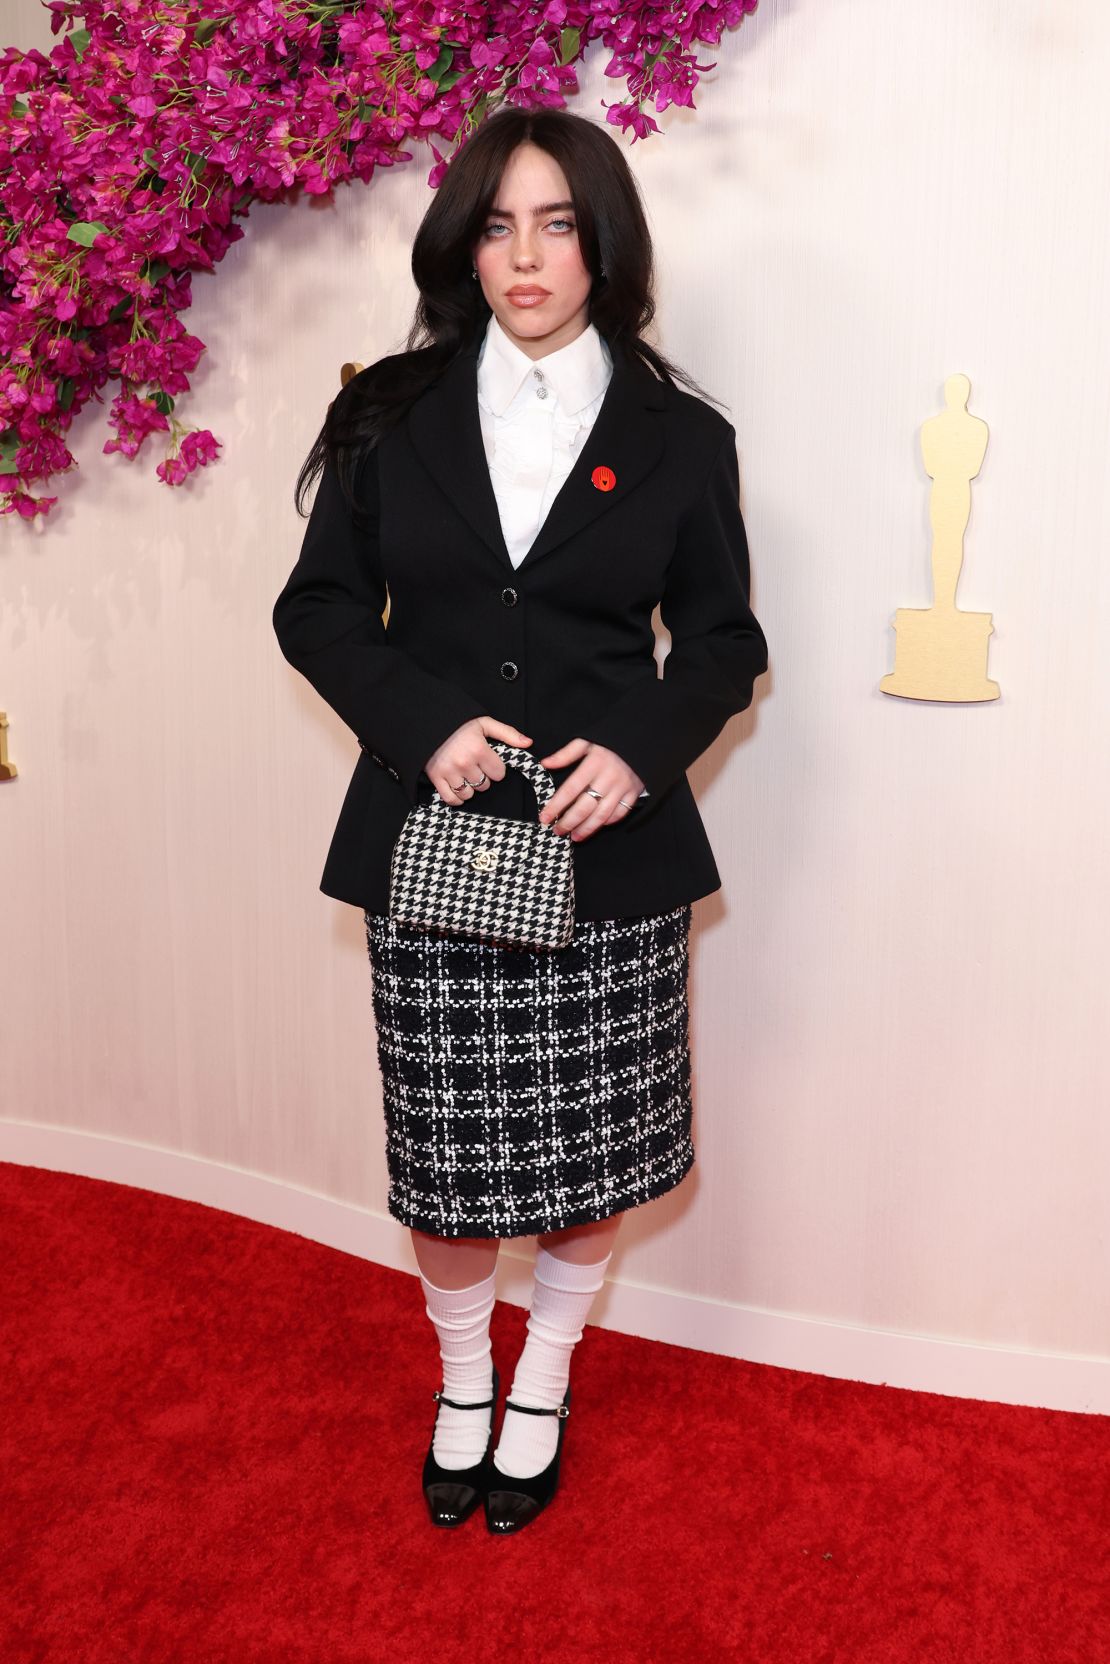 Billie Eilish, nominated for Best Original Song, arrived at the ceremony at Chanel.